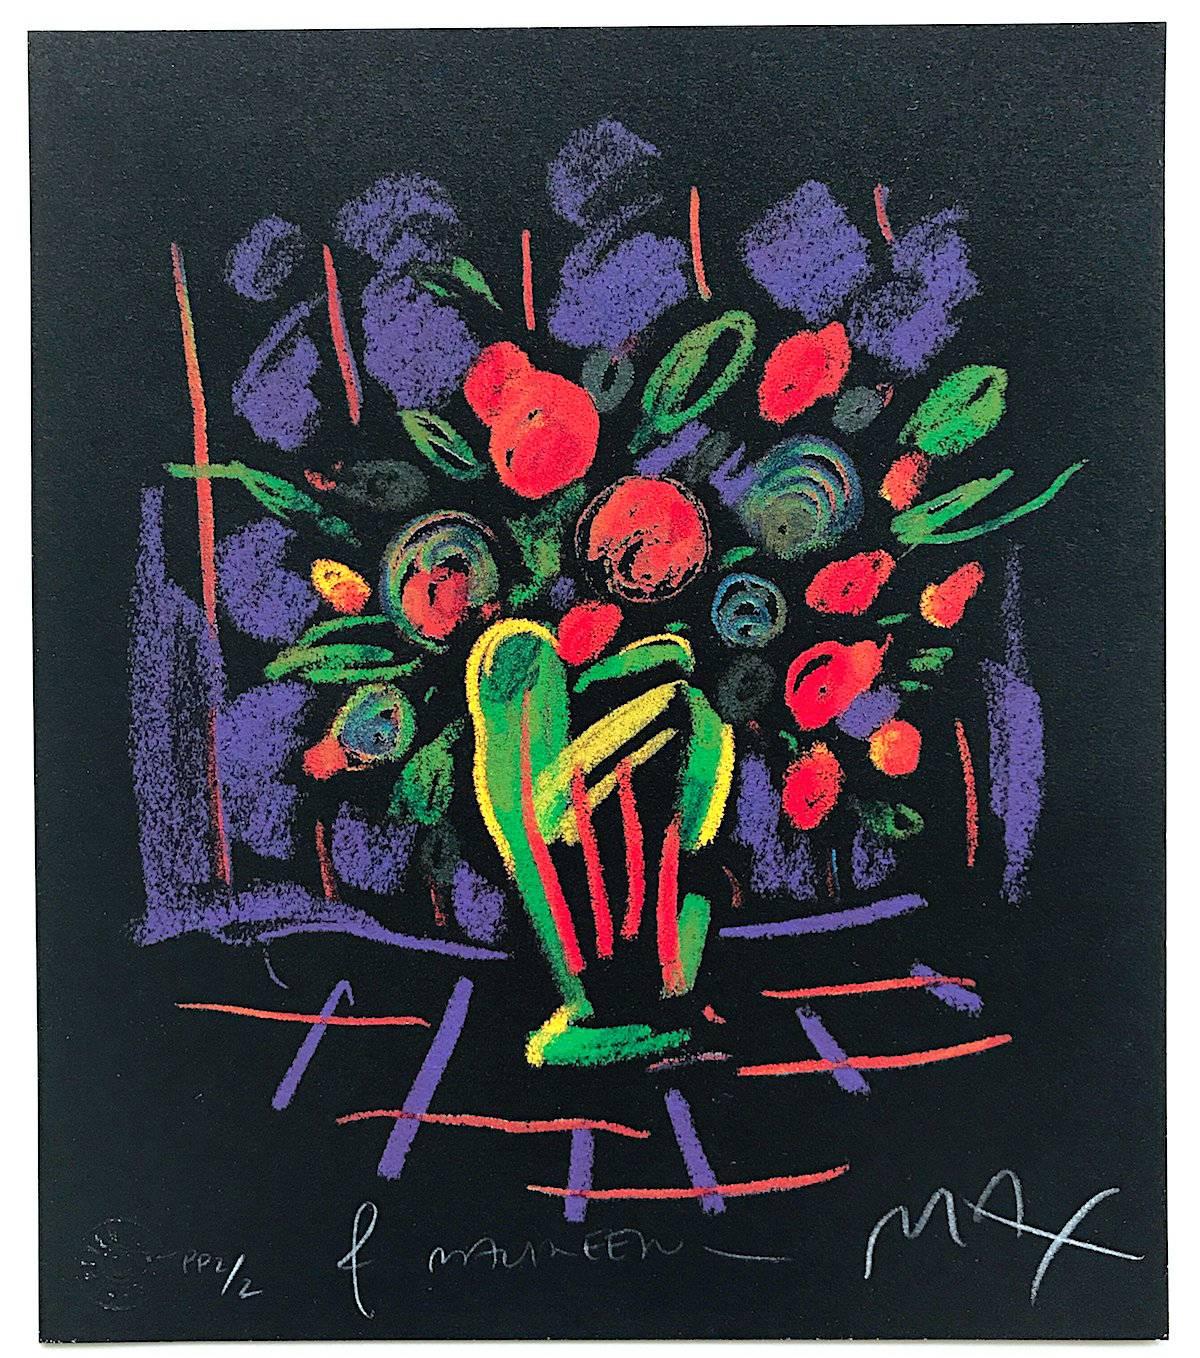 Peter Max Still-Life Print - Romance Suite I: FLOWERS Signed Lithograph, Abstract Floral, Pop Art Still Life